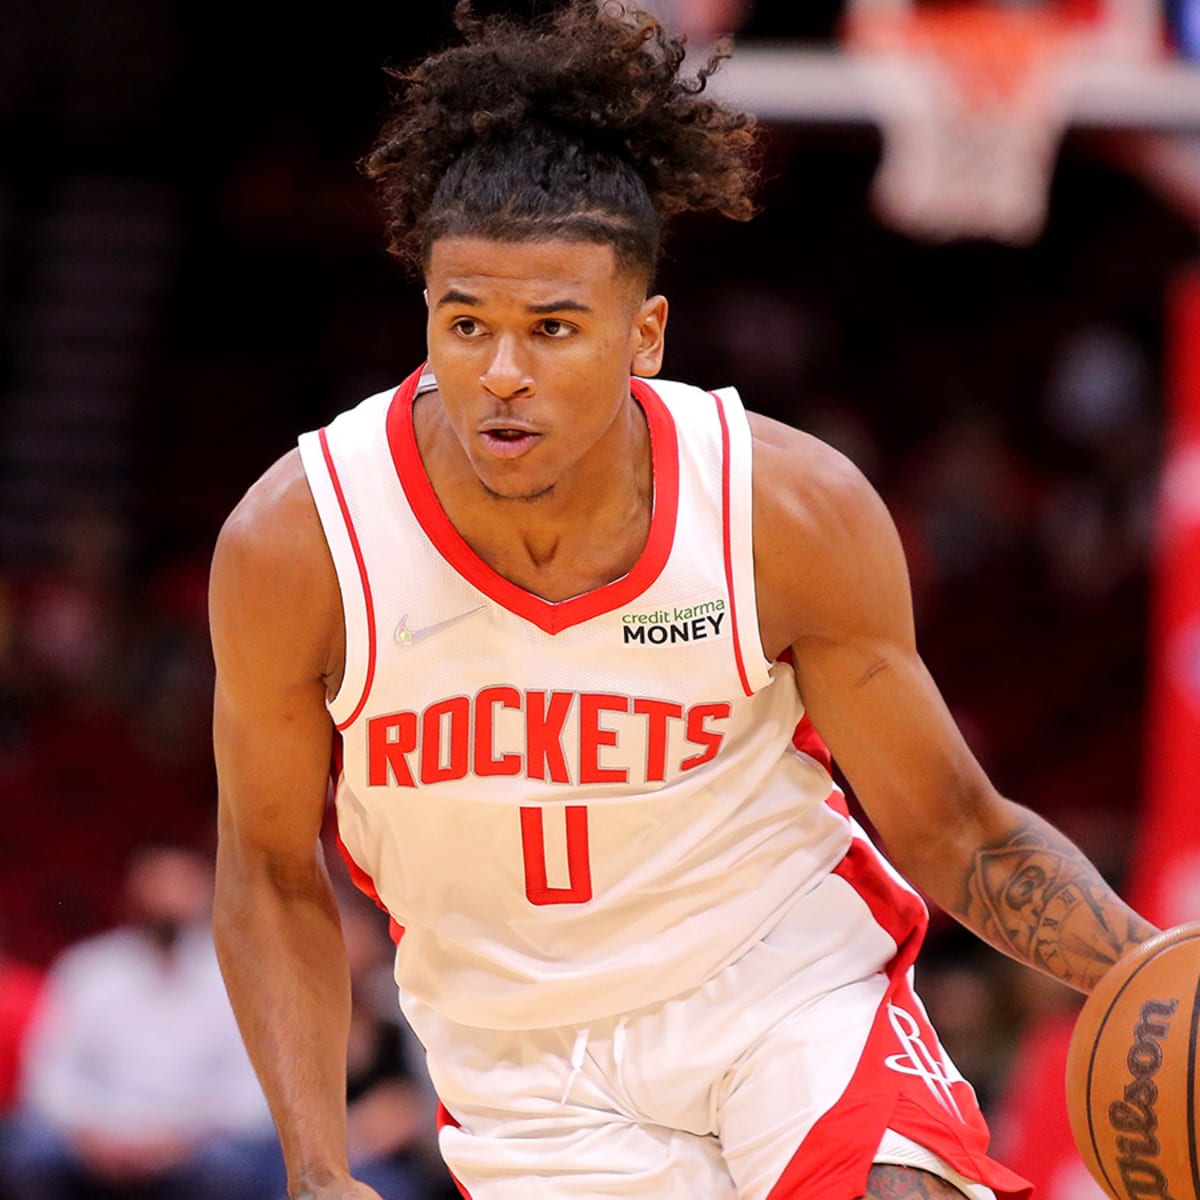 Rockets star Jalen Green changing jersey number to No. 4 next season